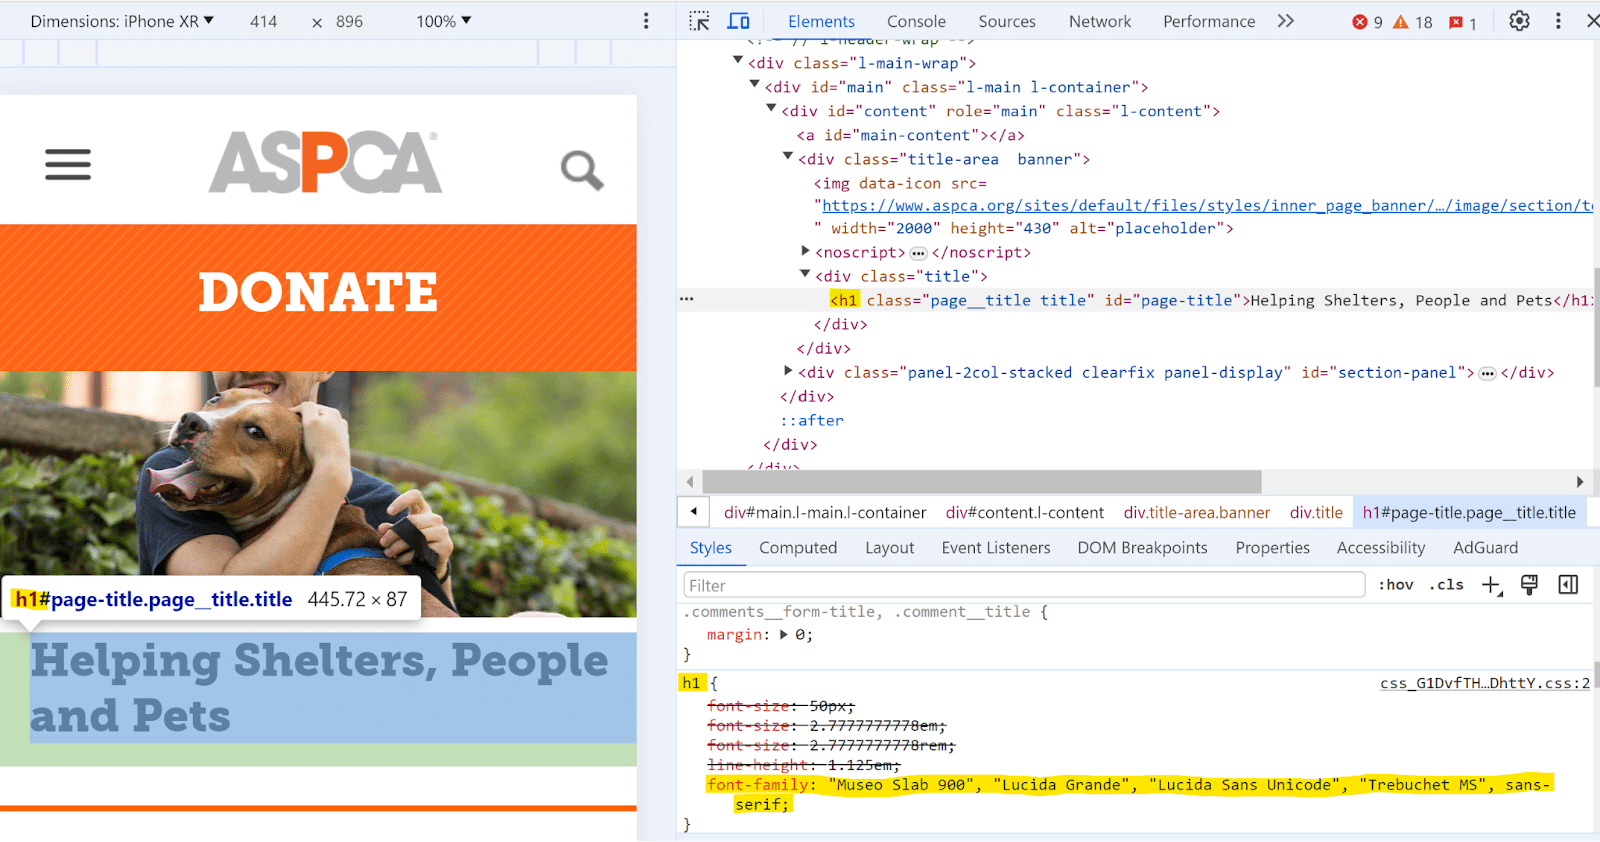 Inspect element - find font type